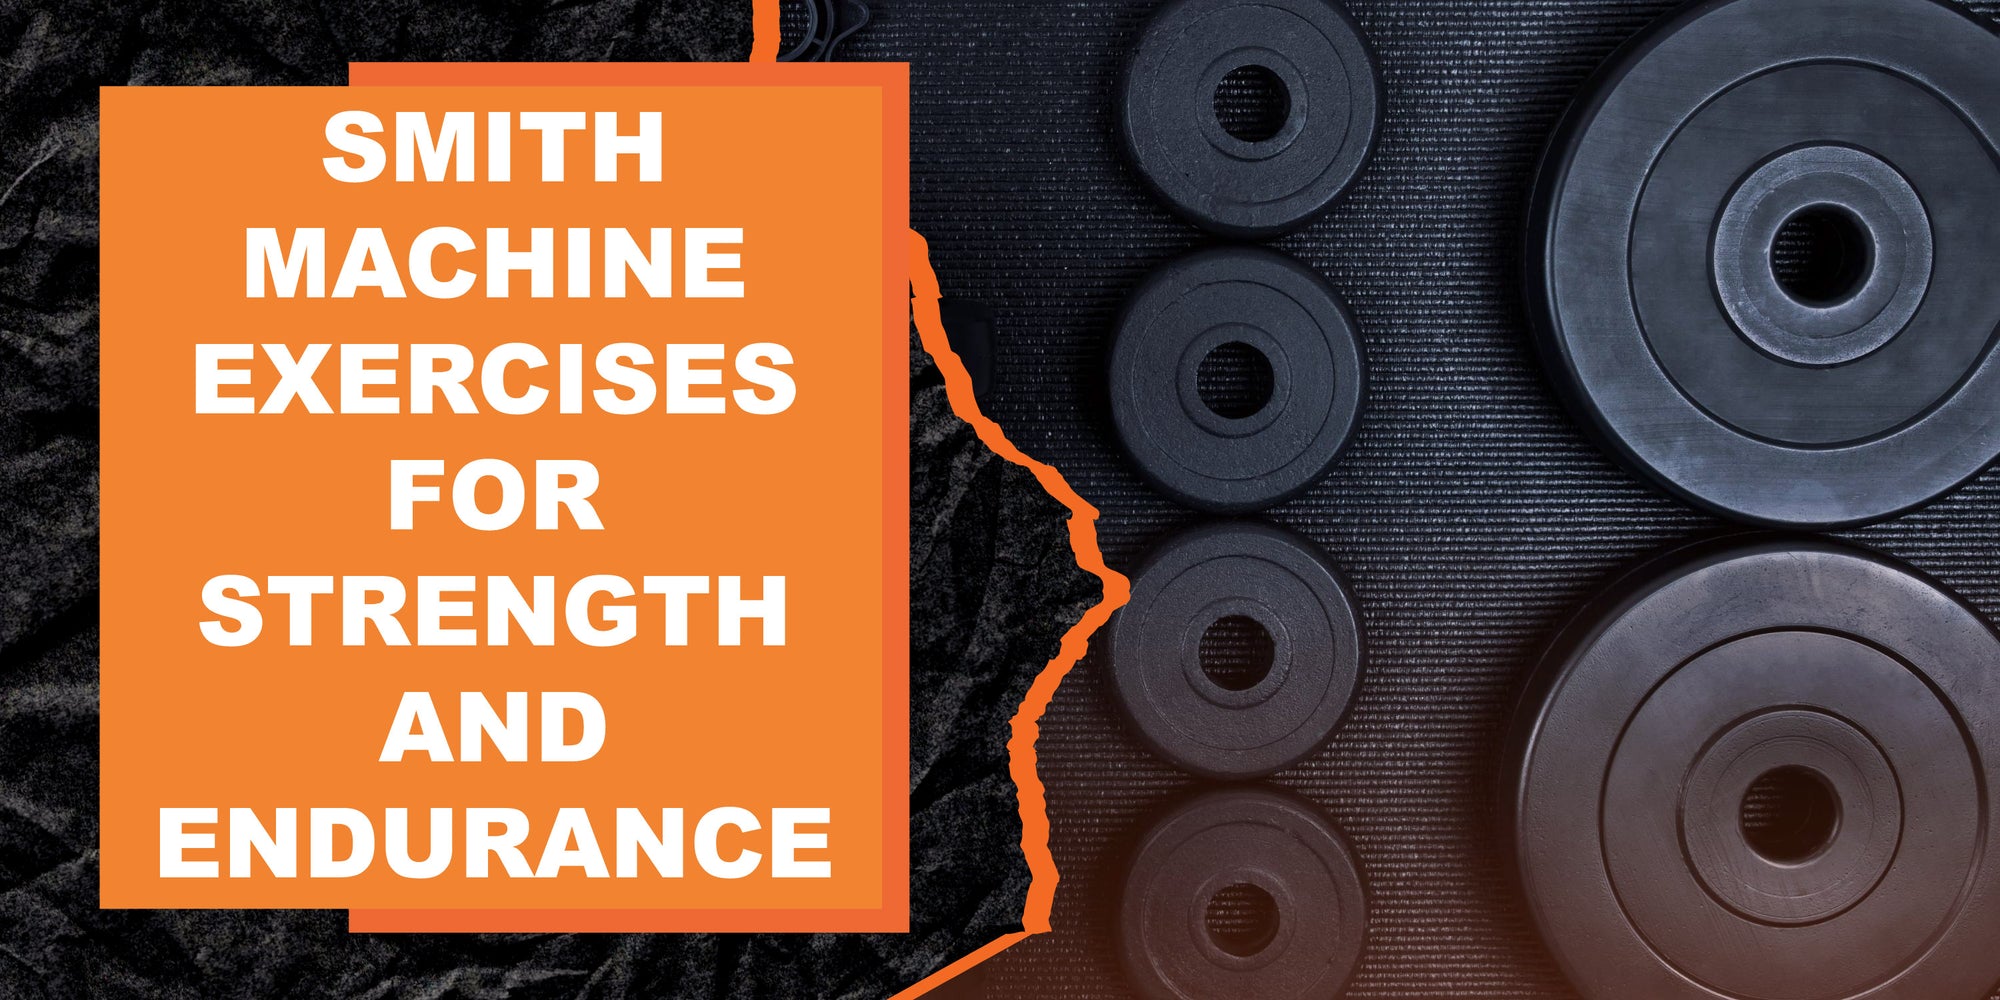 Smith Machine Exercises for Strength and Endurance